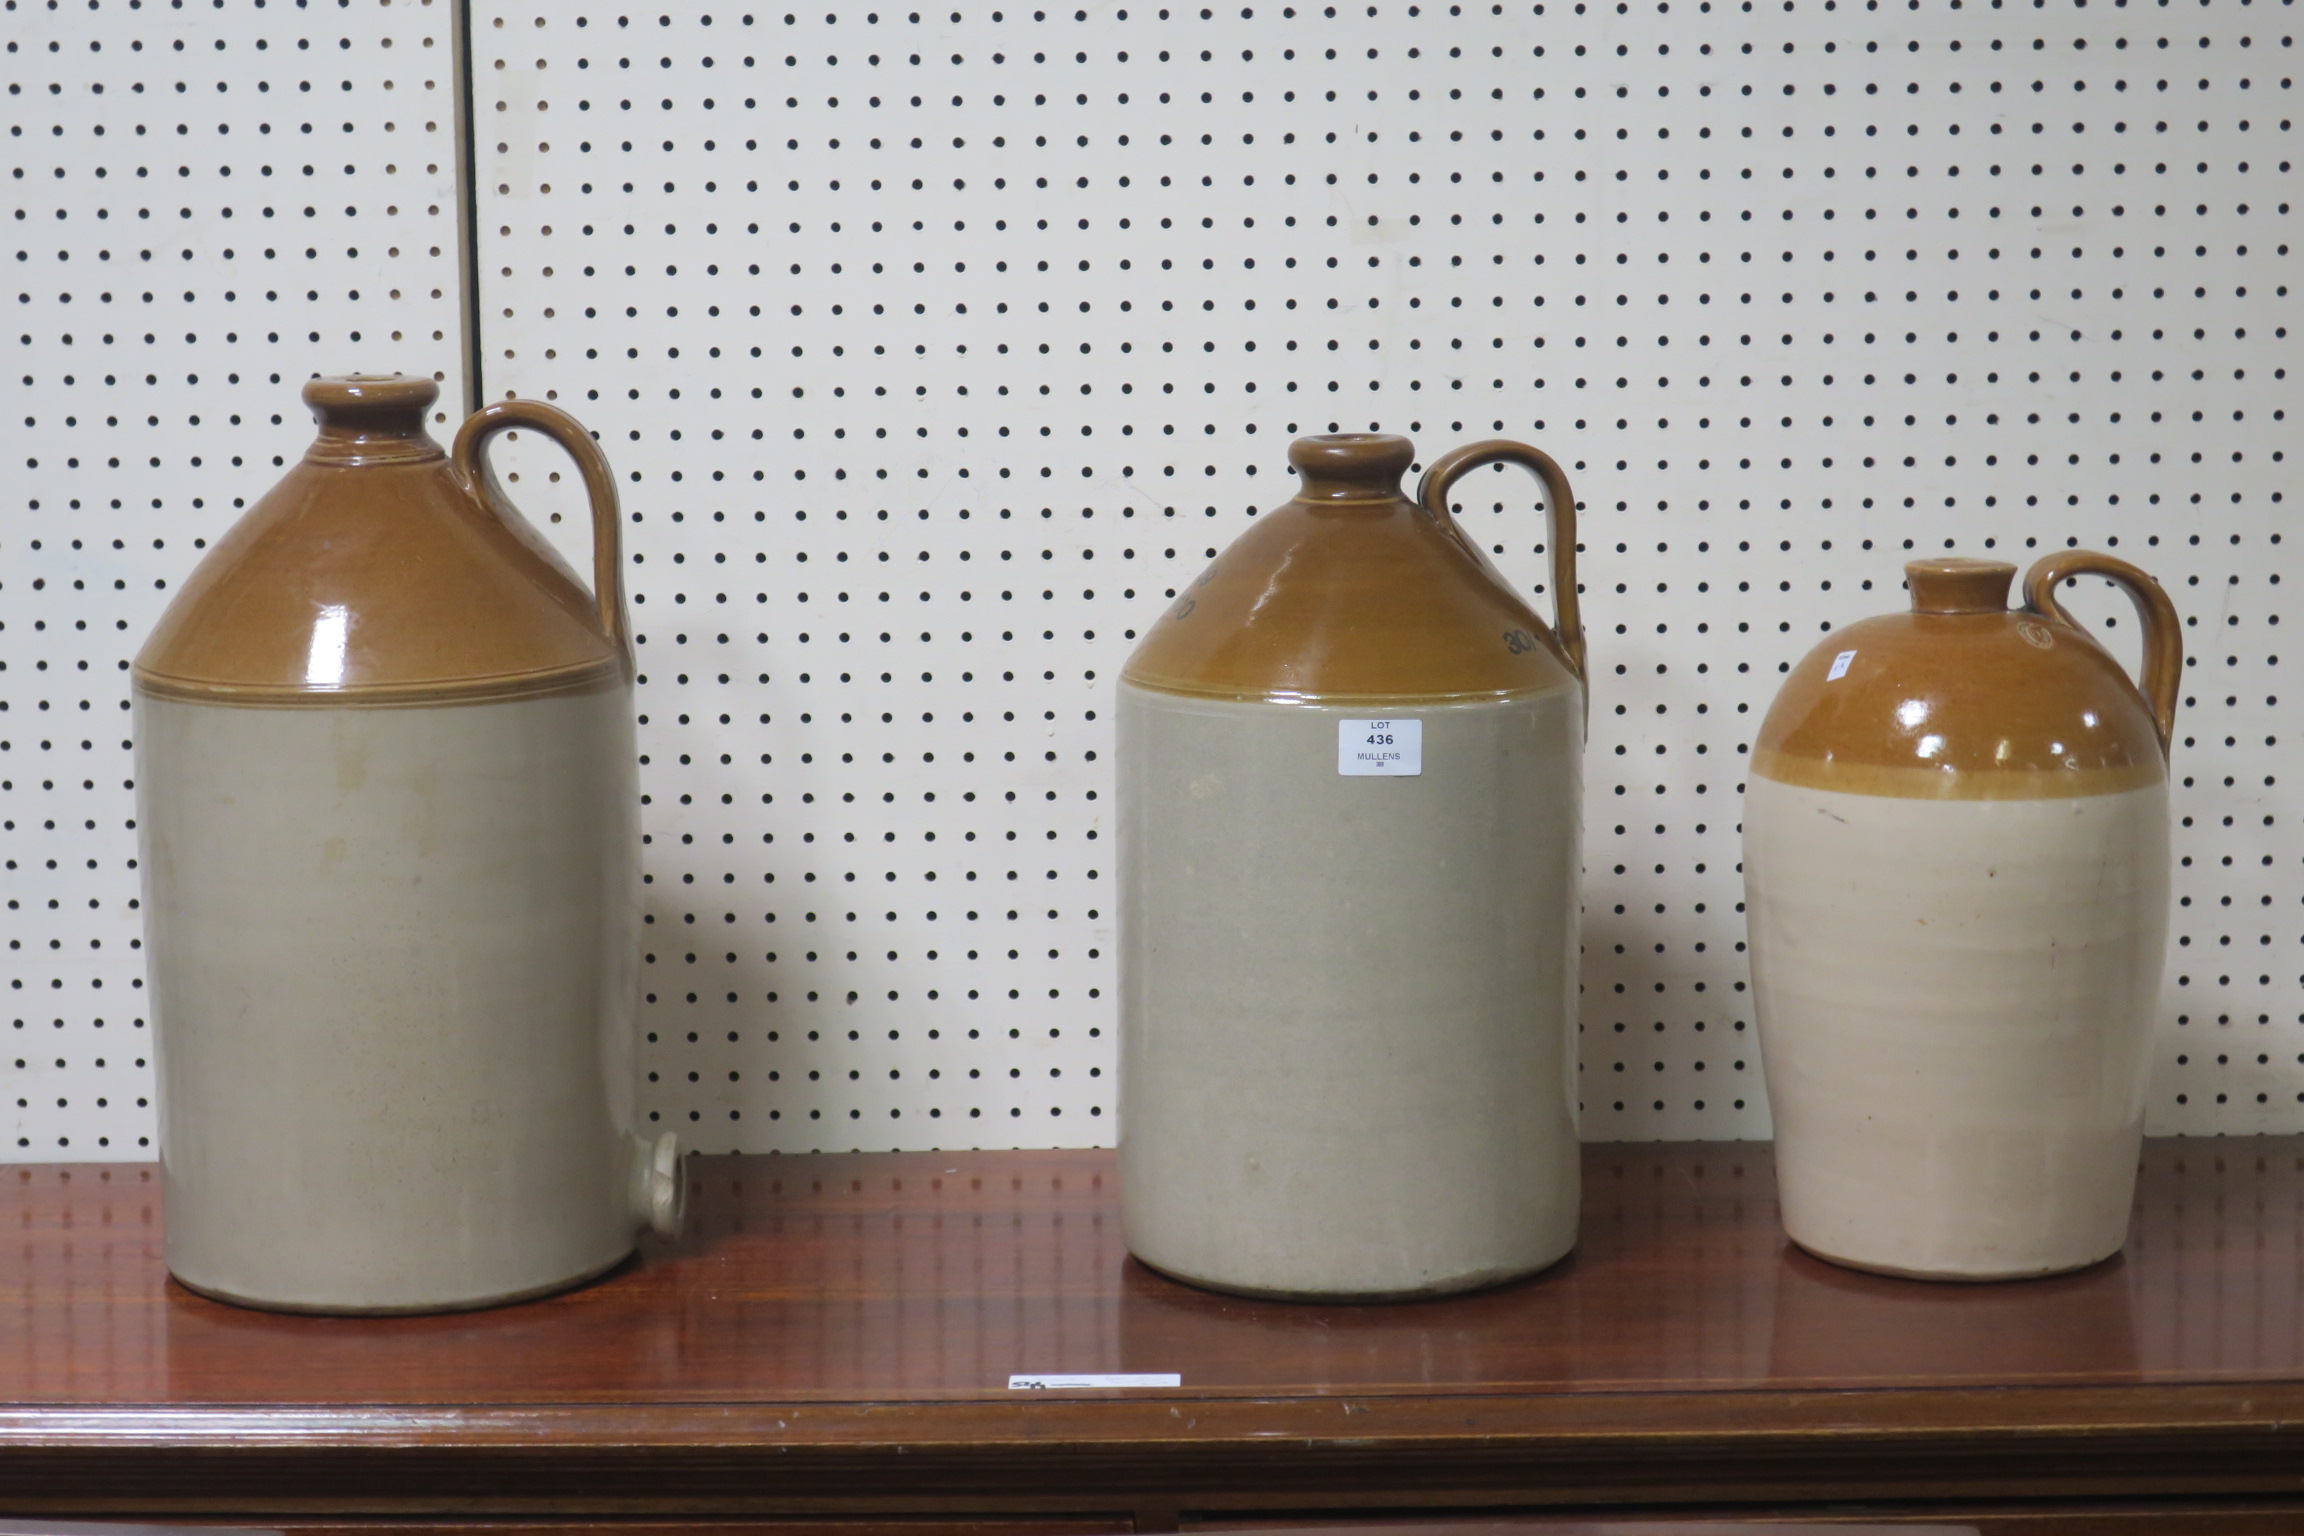 THREE GLAZED EARTHENWARE WHISKY JARS inscribed Murray & Company Glasgow numbered 2 3 and 4